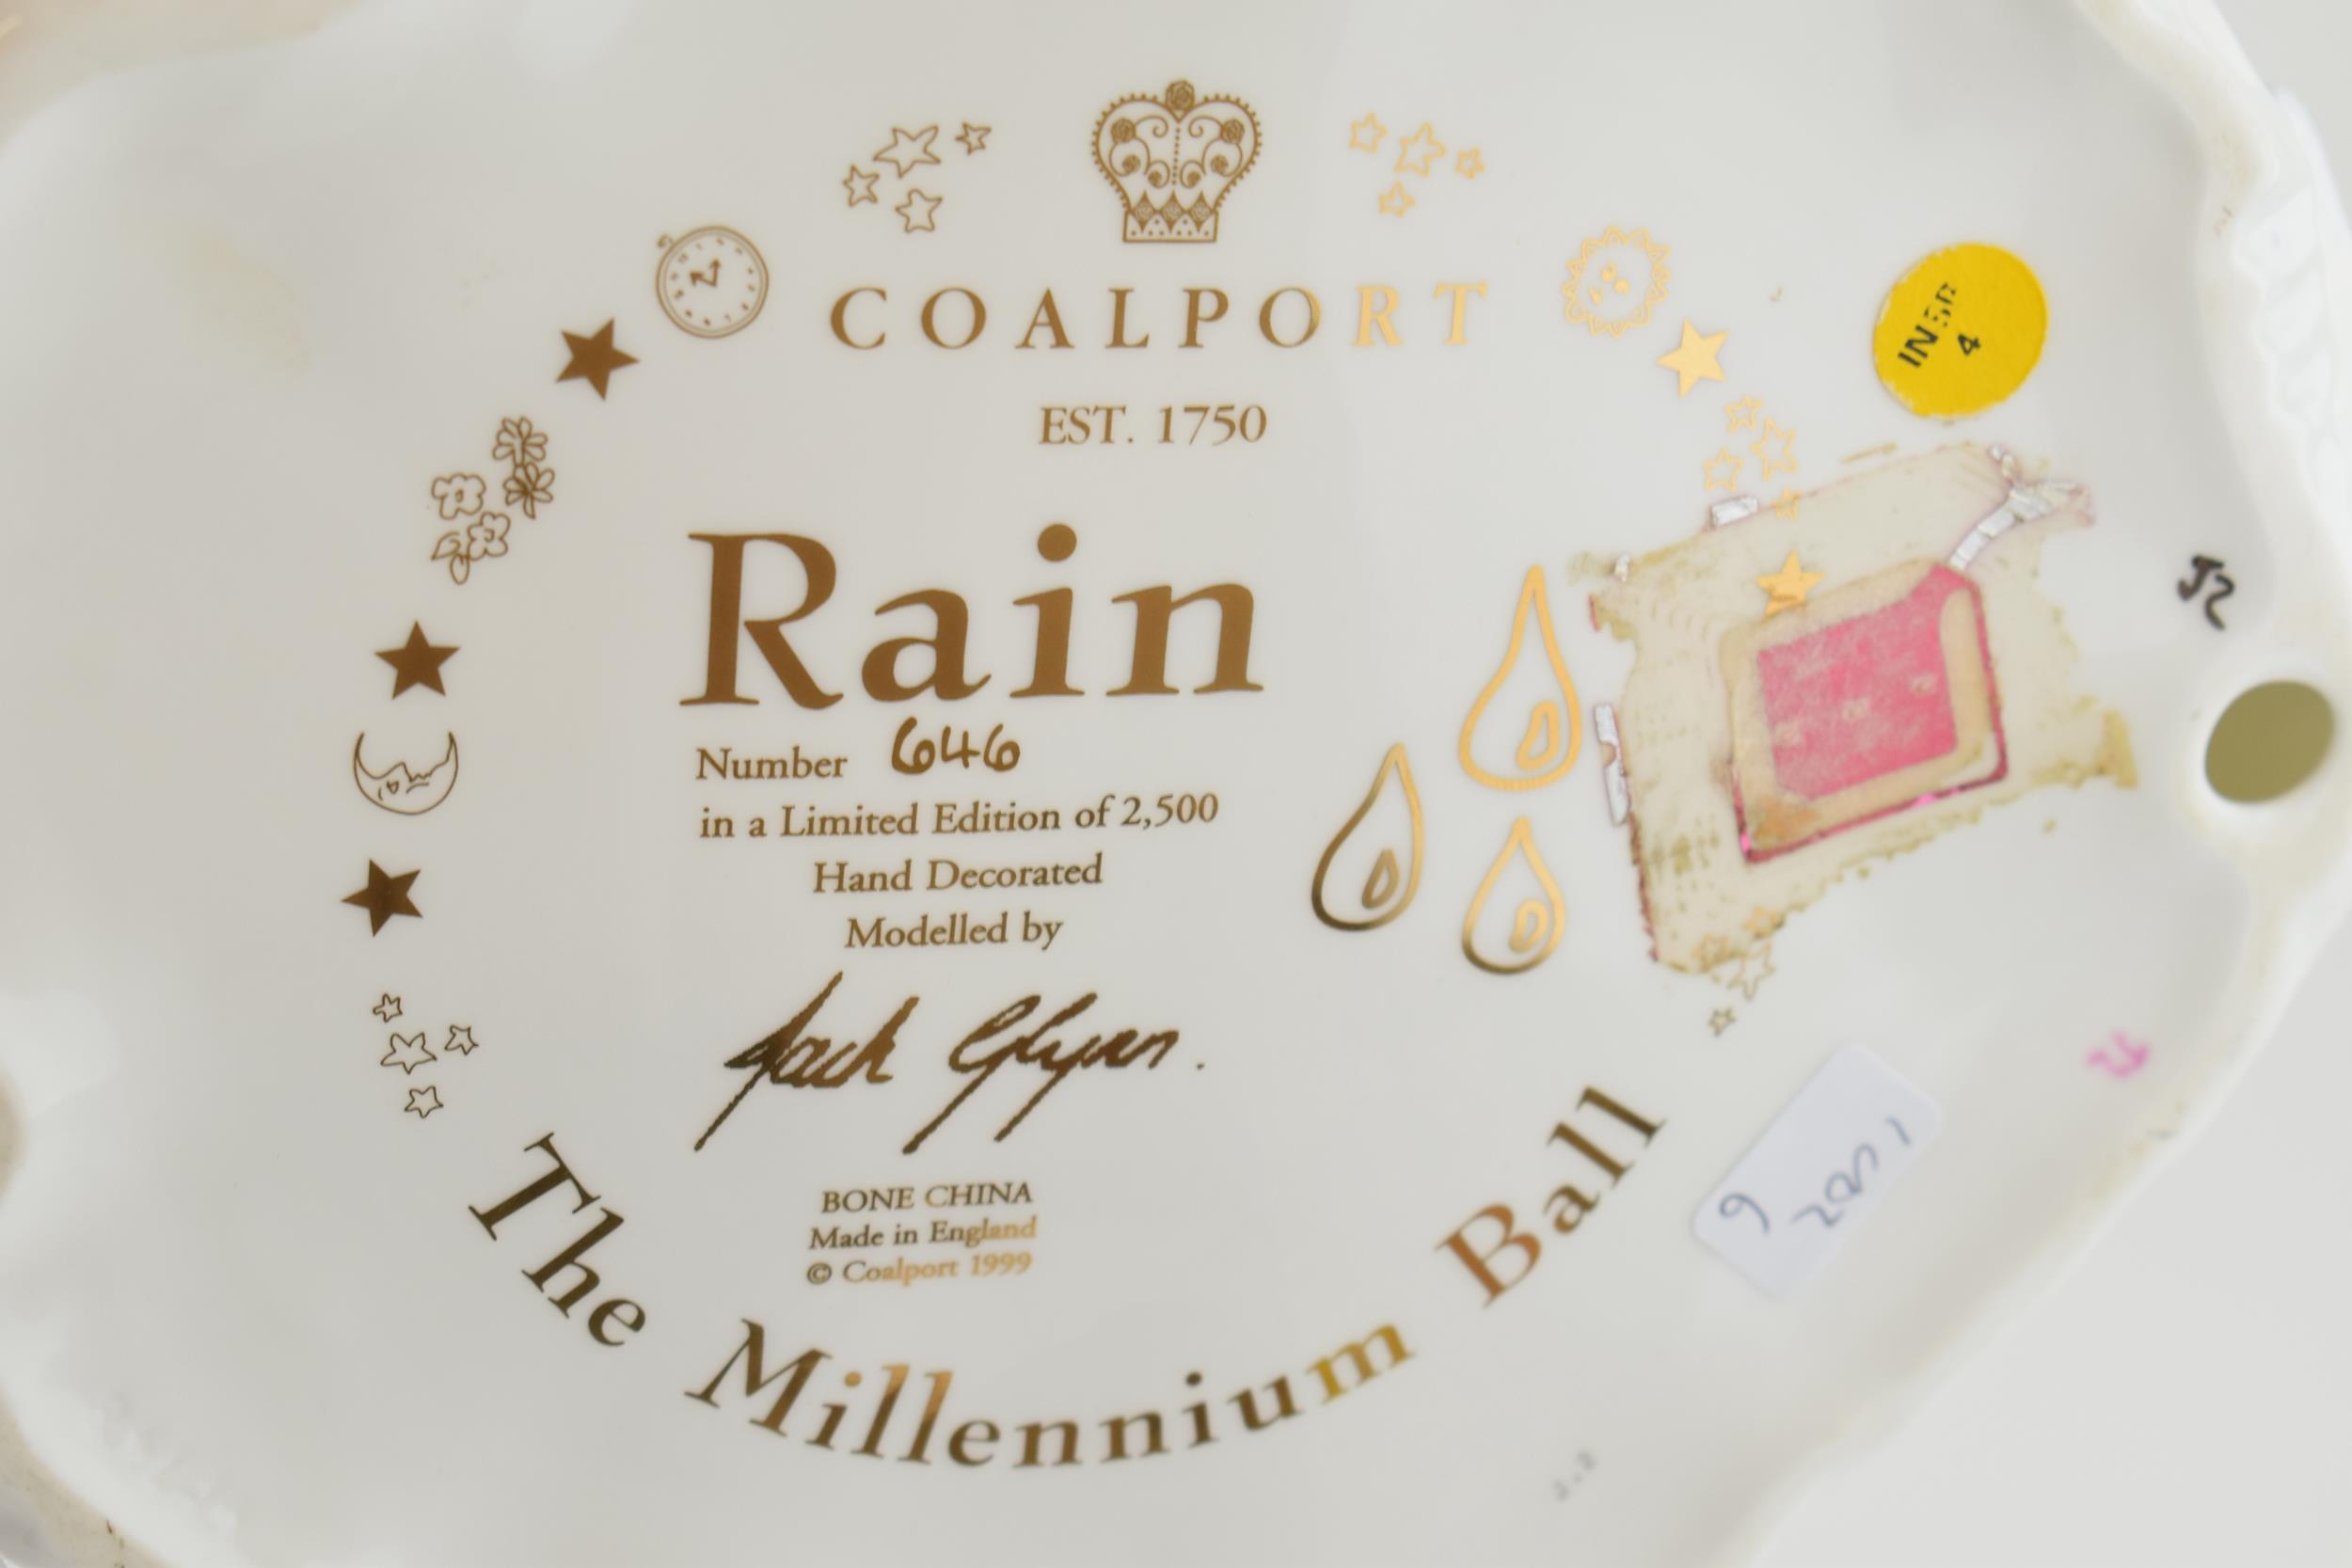 Coalport limited edition figurine from The Millennium Ball series 'Rain'. Good condition, displays - Image 4 of 4